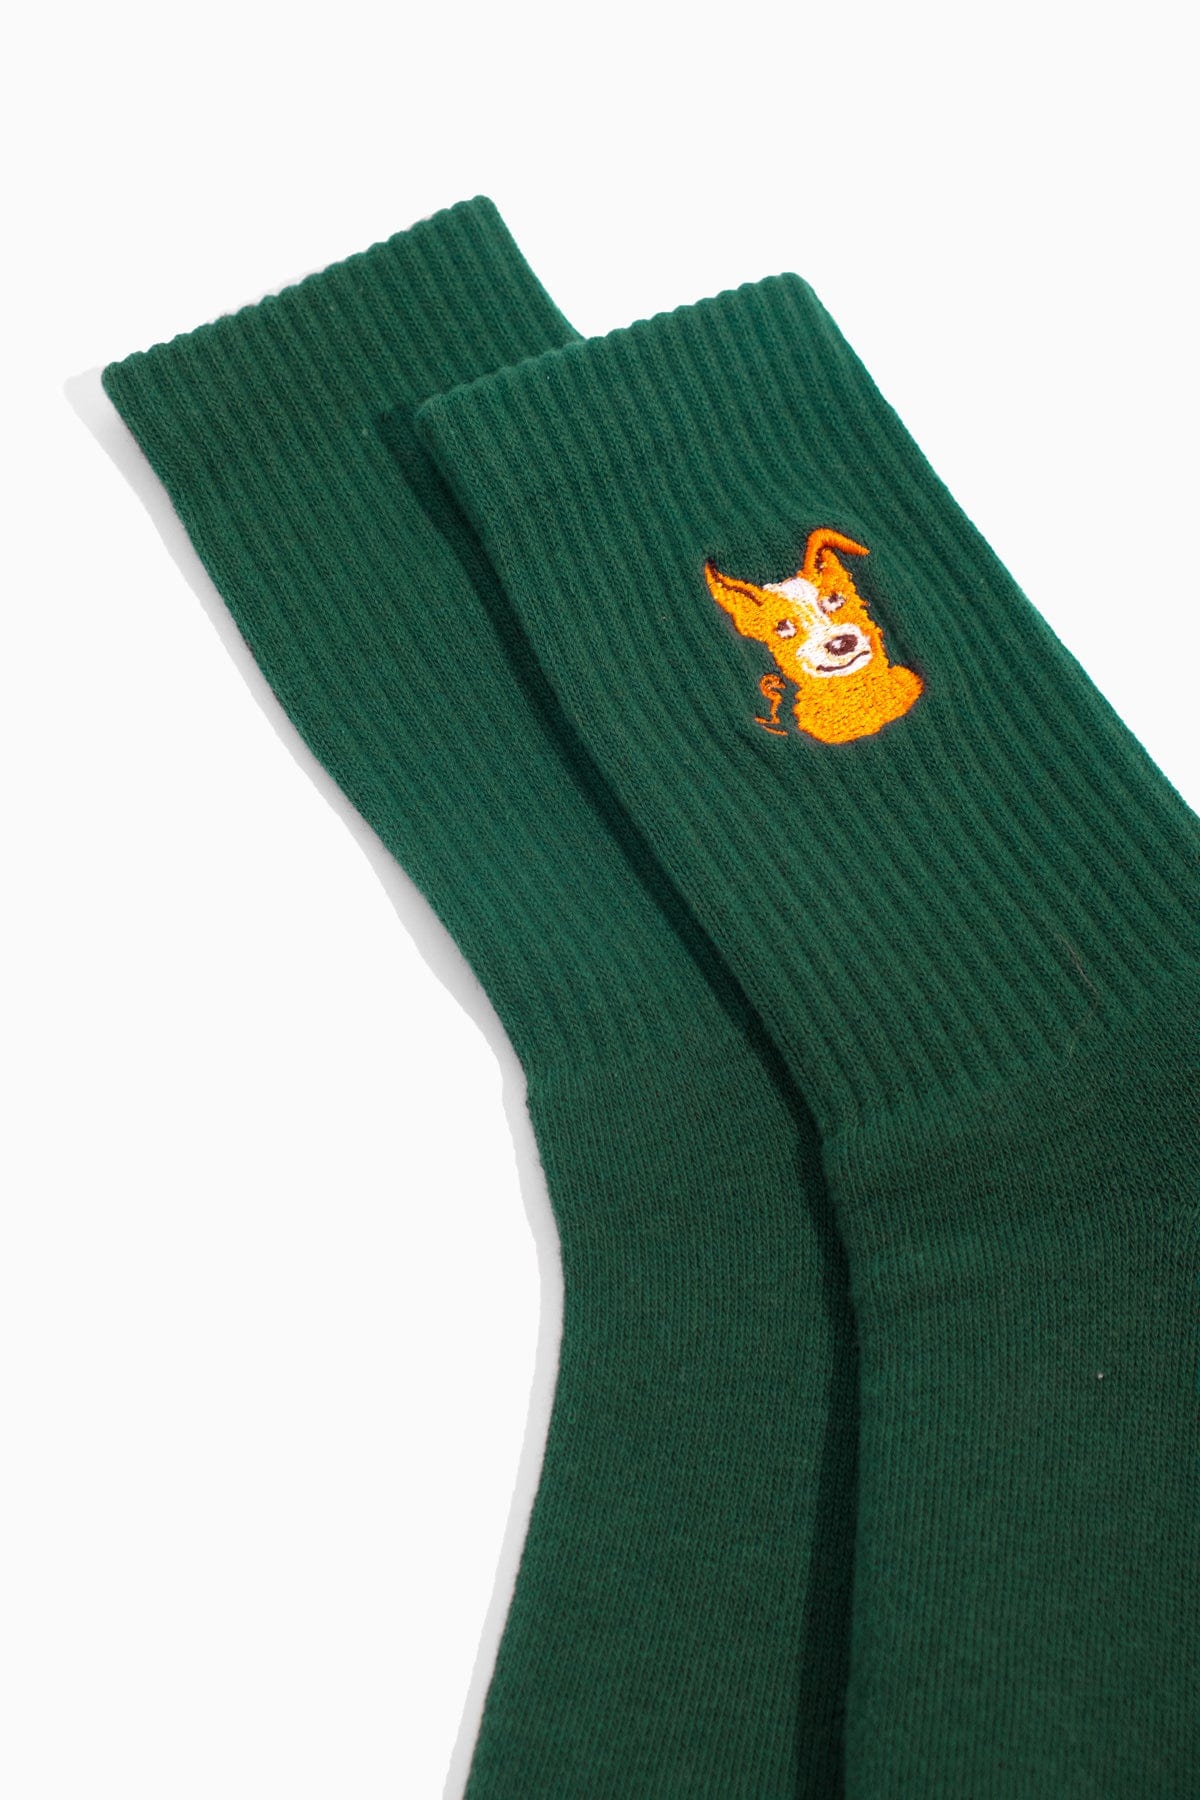 Swoopy Bois Crew Sock - 3 Pack | TradeMutt Accessories